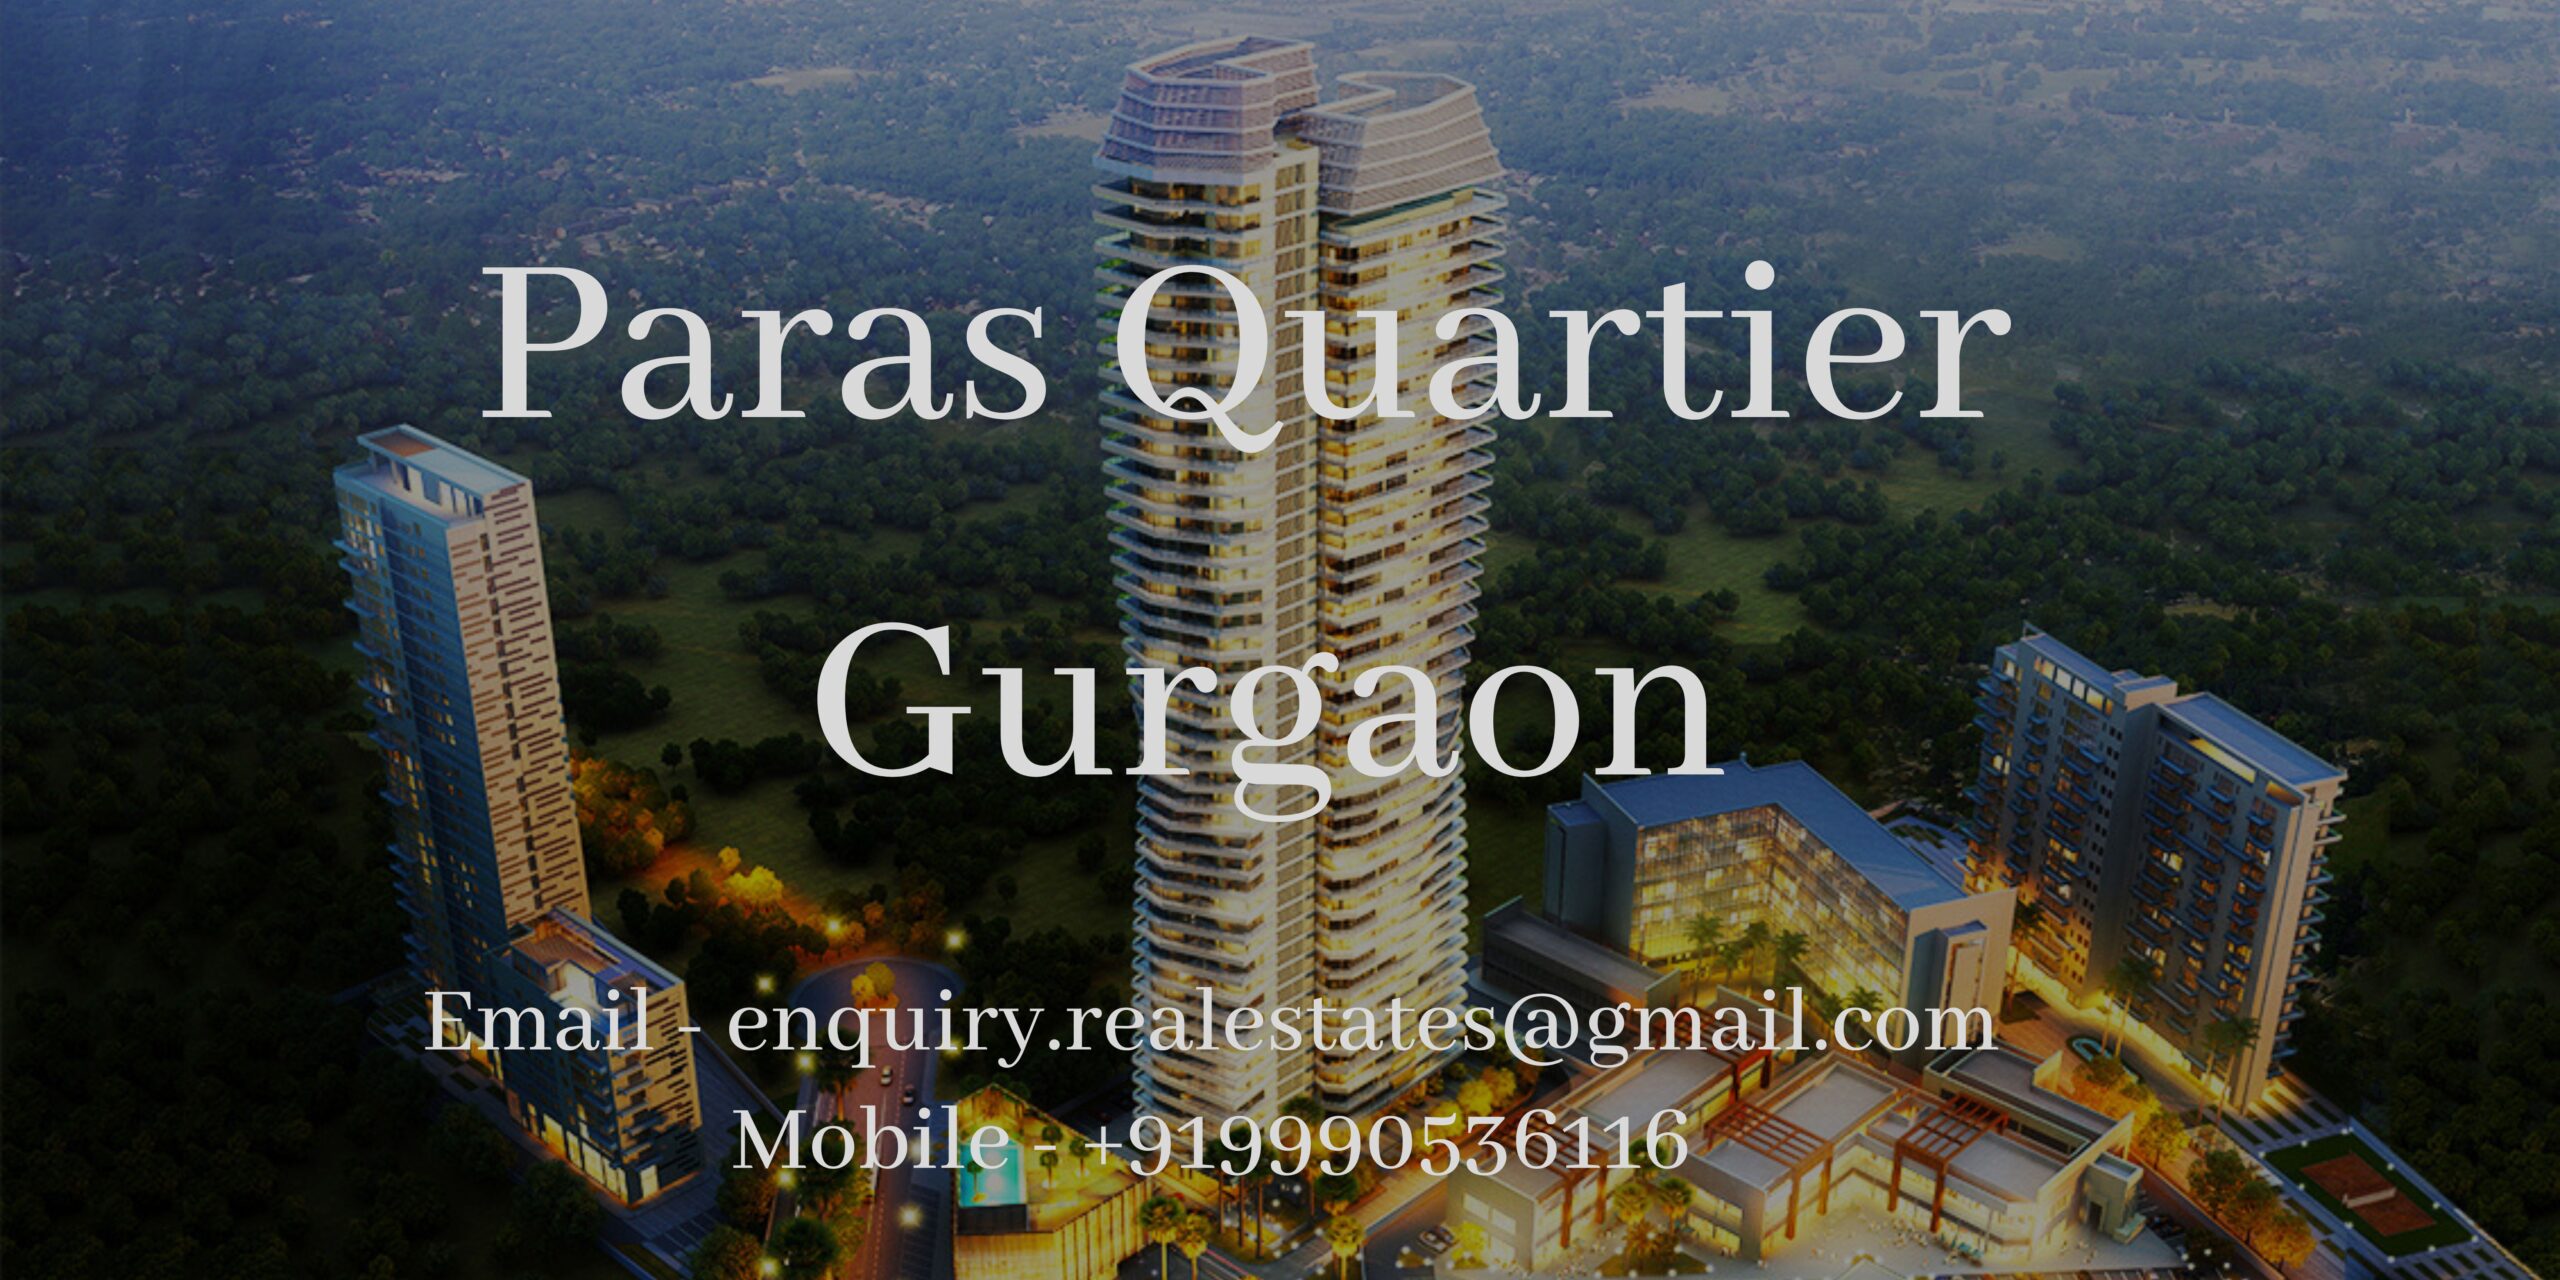 Paras Quartier Gurgaon: A Luxe Abode in the Heart of the City